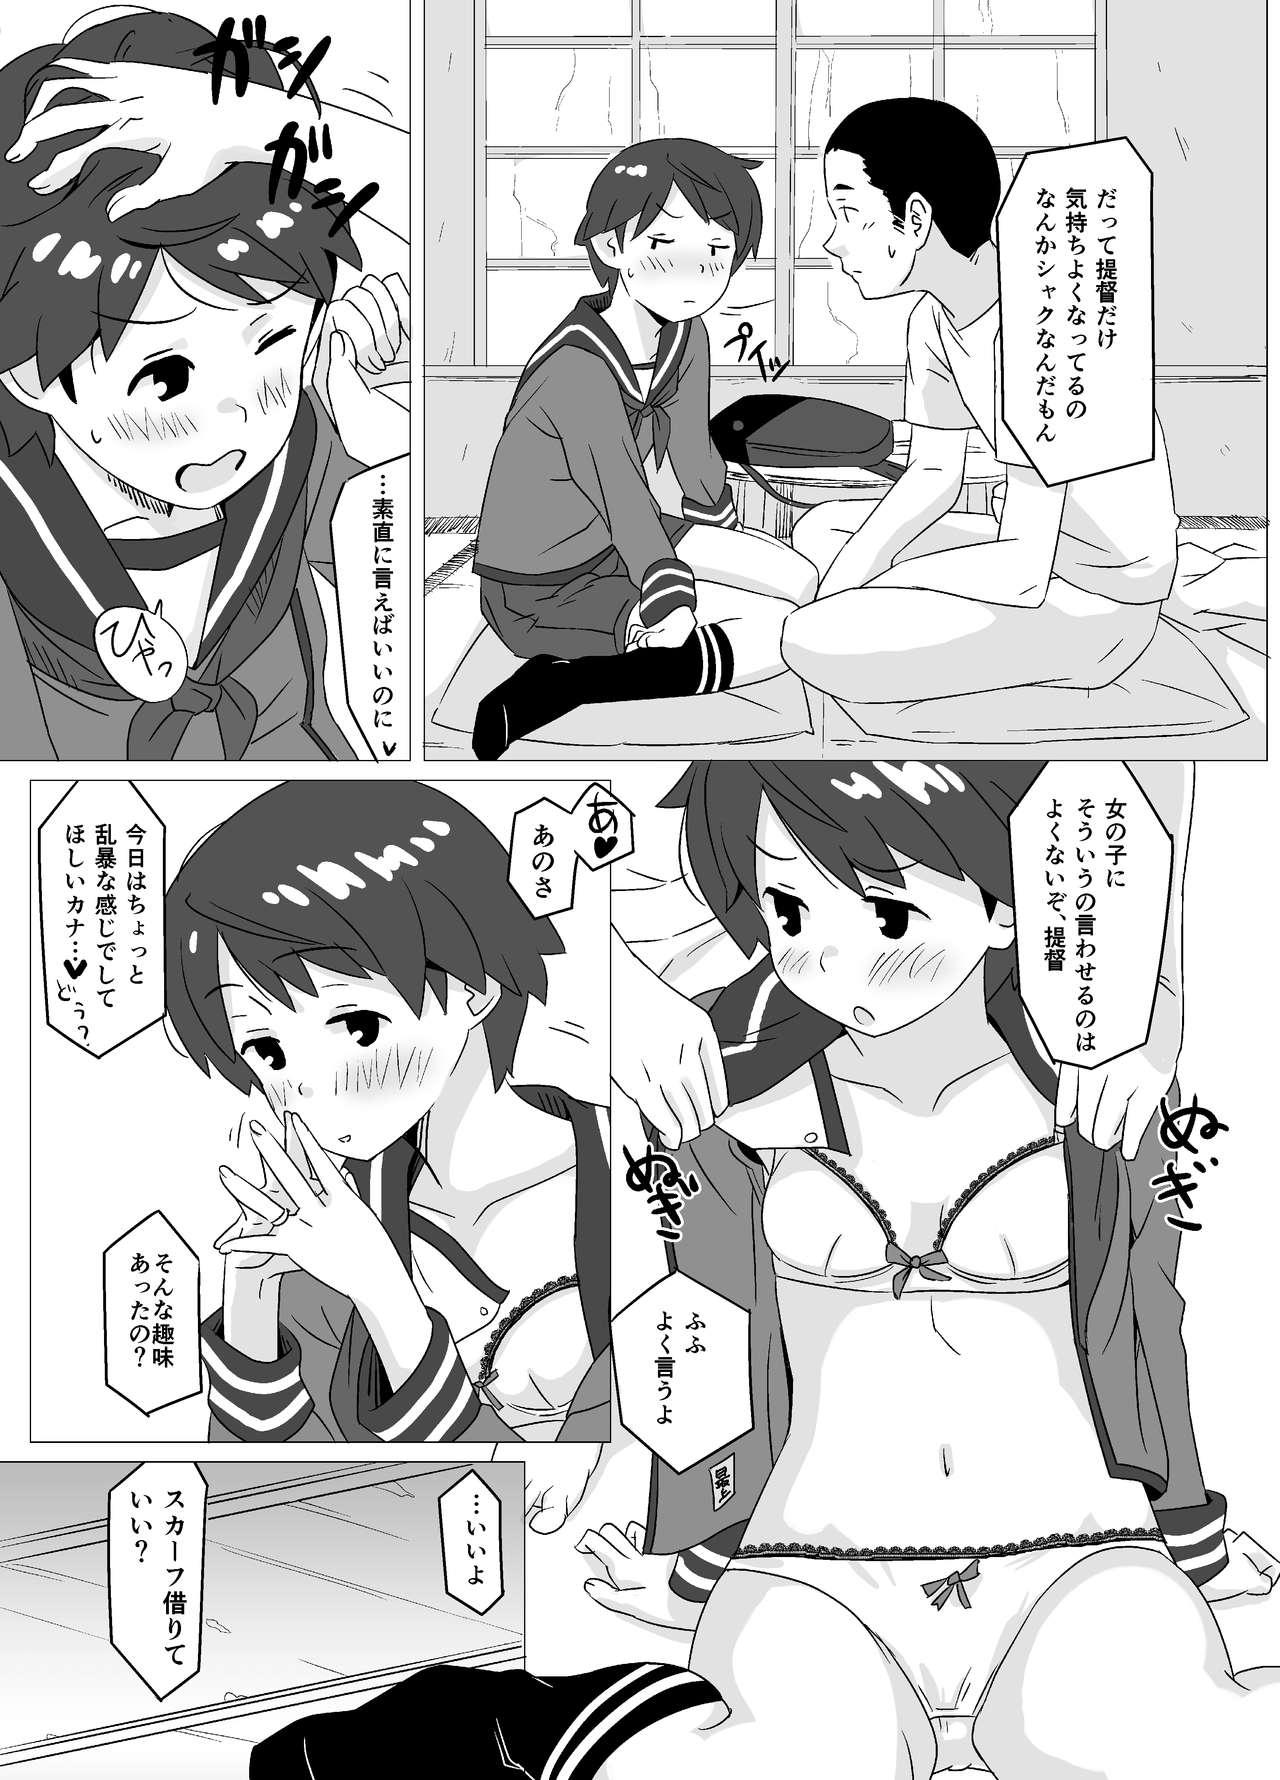 Panty Tantan - Kantai collection Brunettes - Page 8